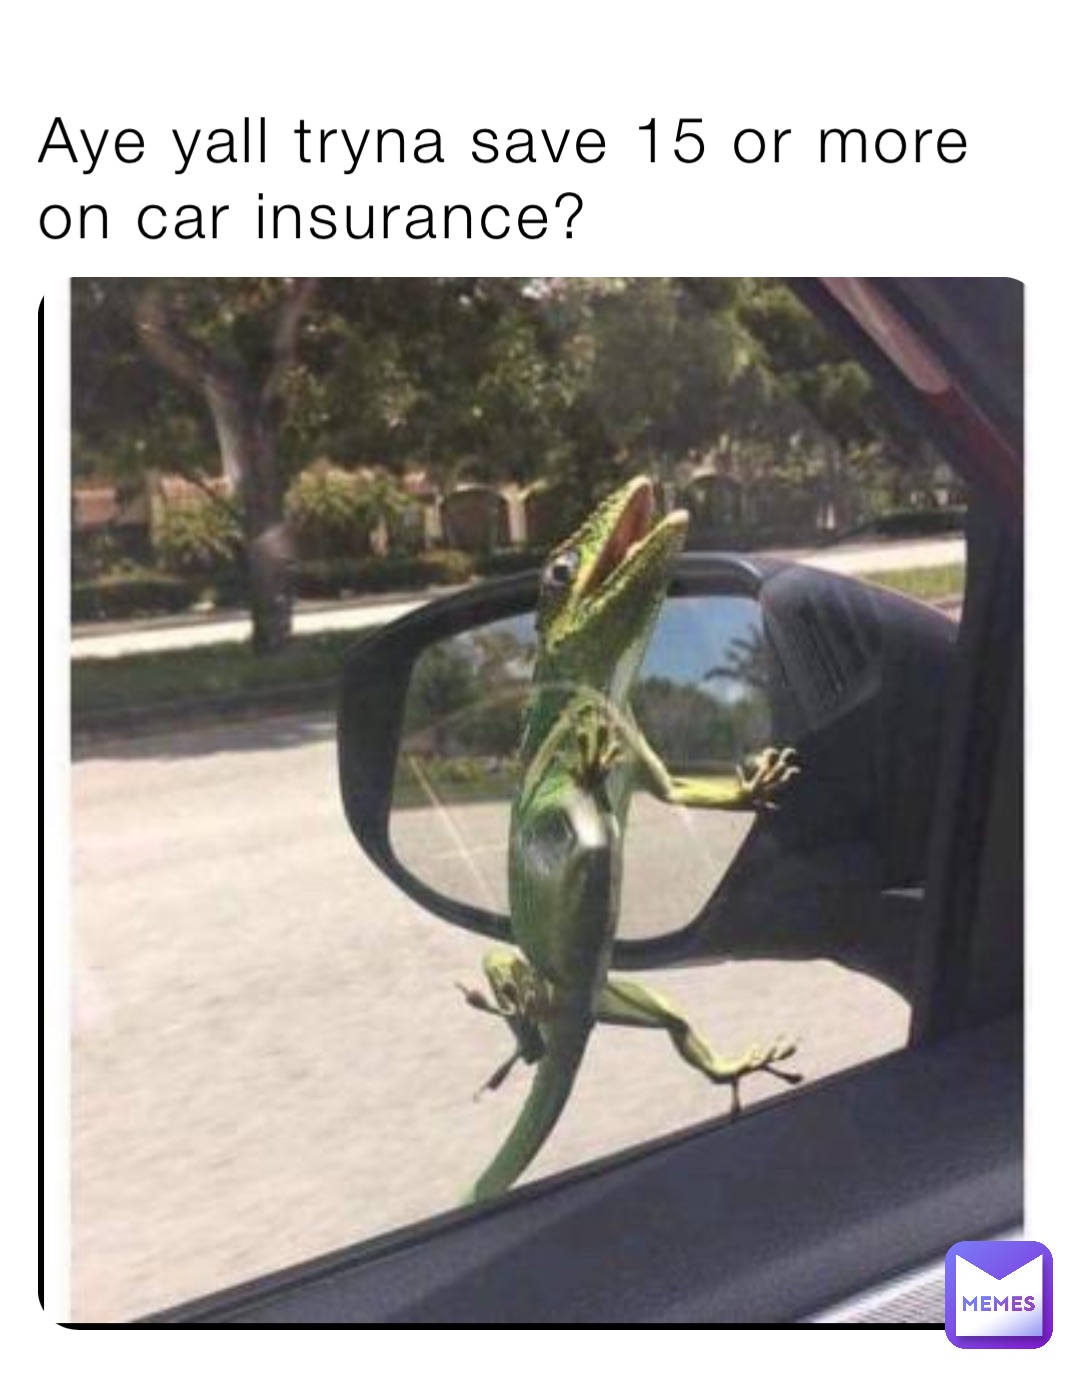 Aye yall tryna save 15 or more on car insurance?